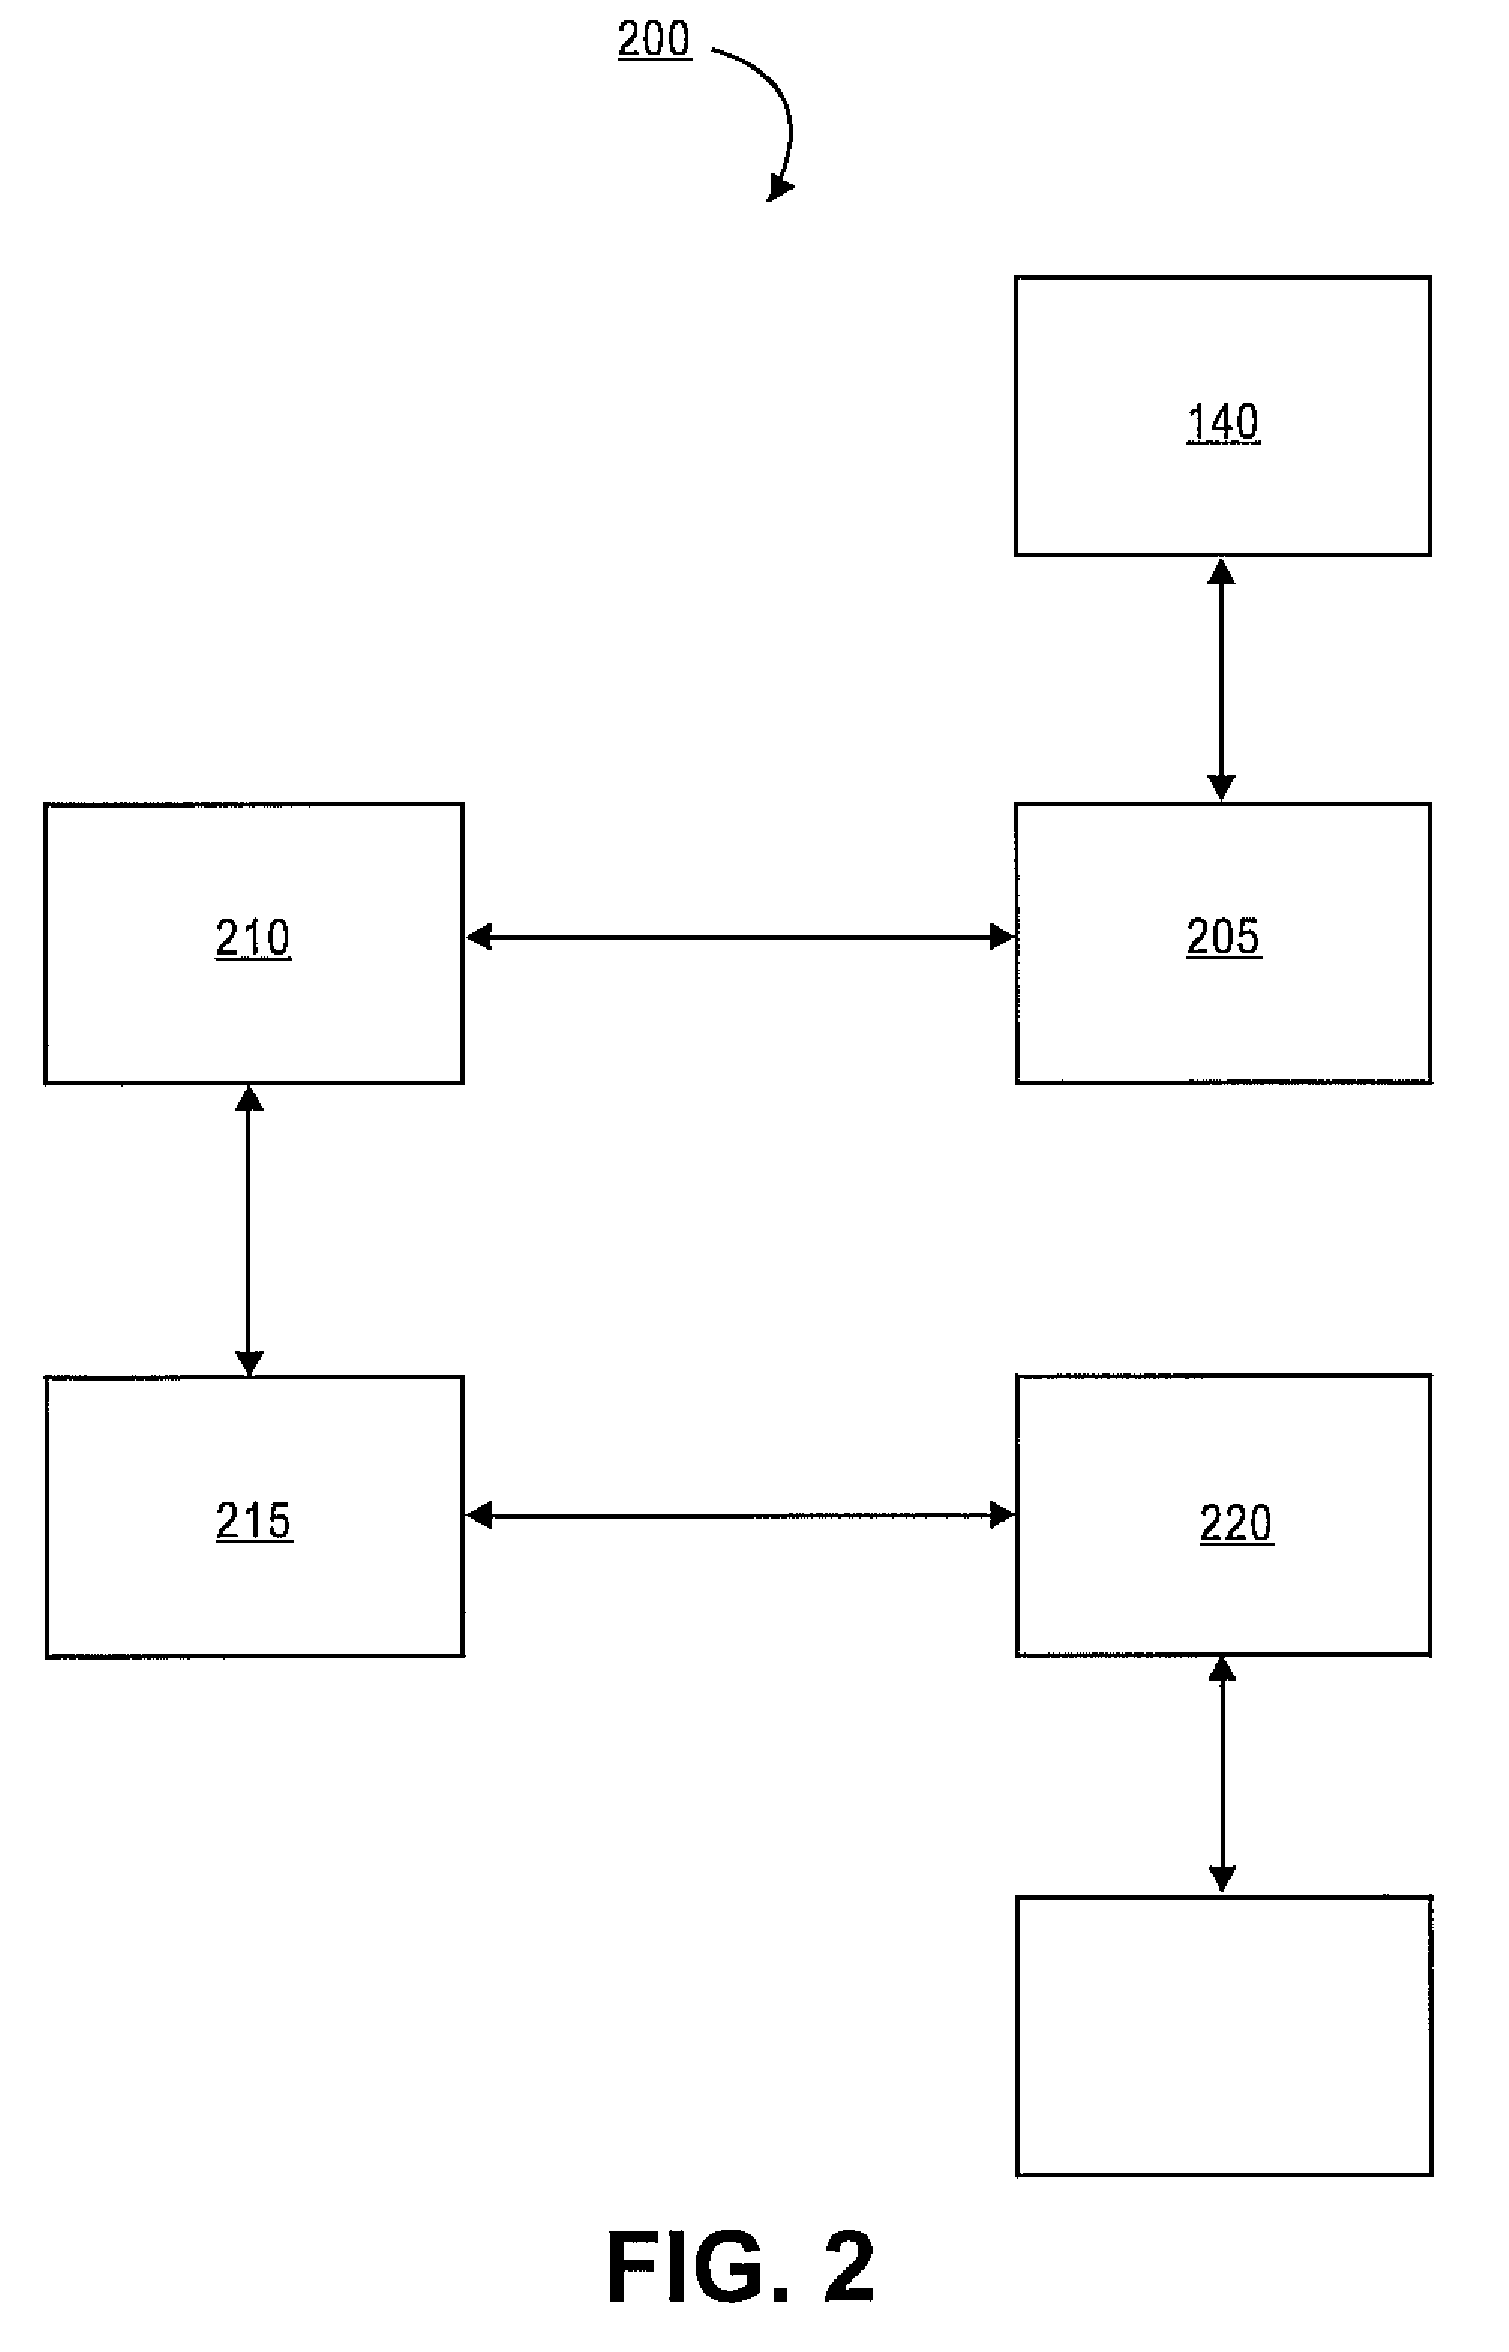 Systems and methods for generating user specified information from a map